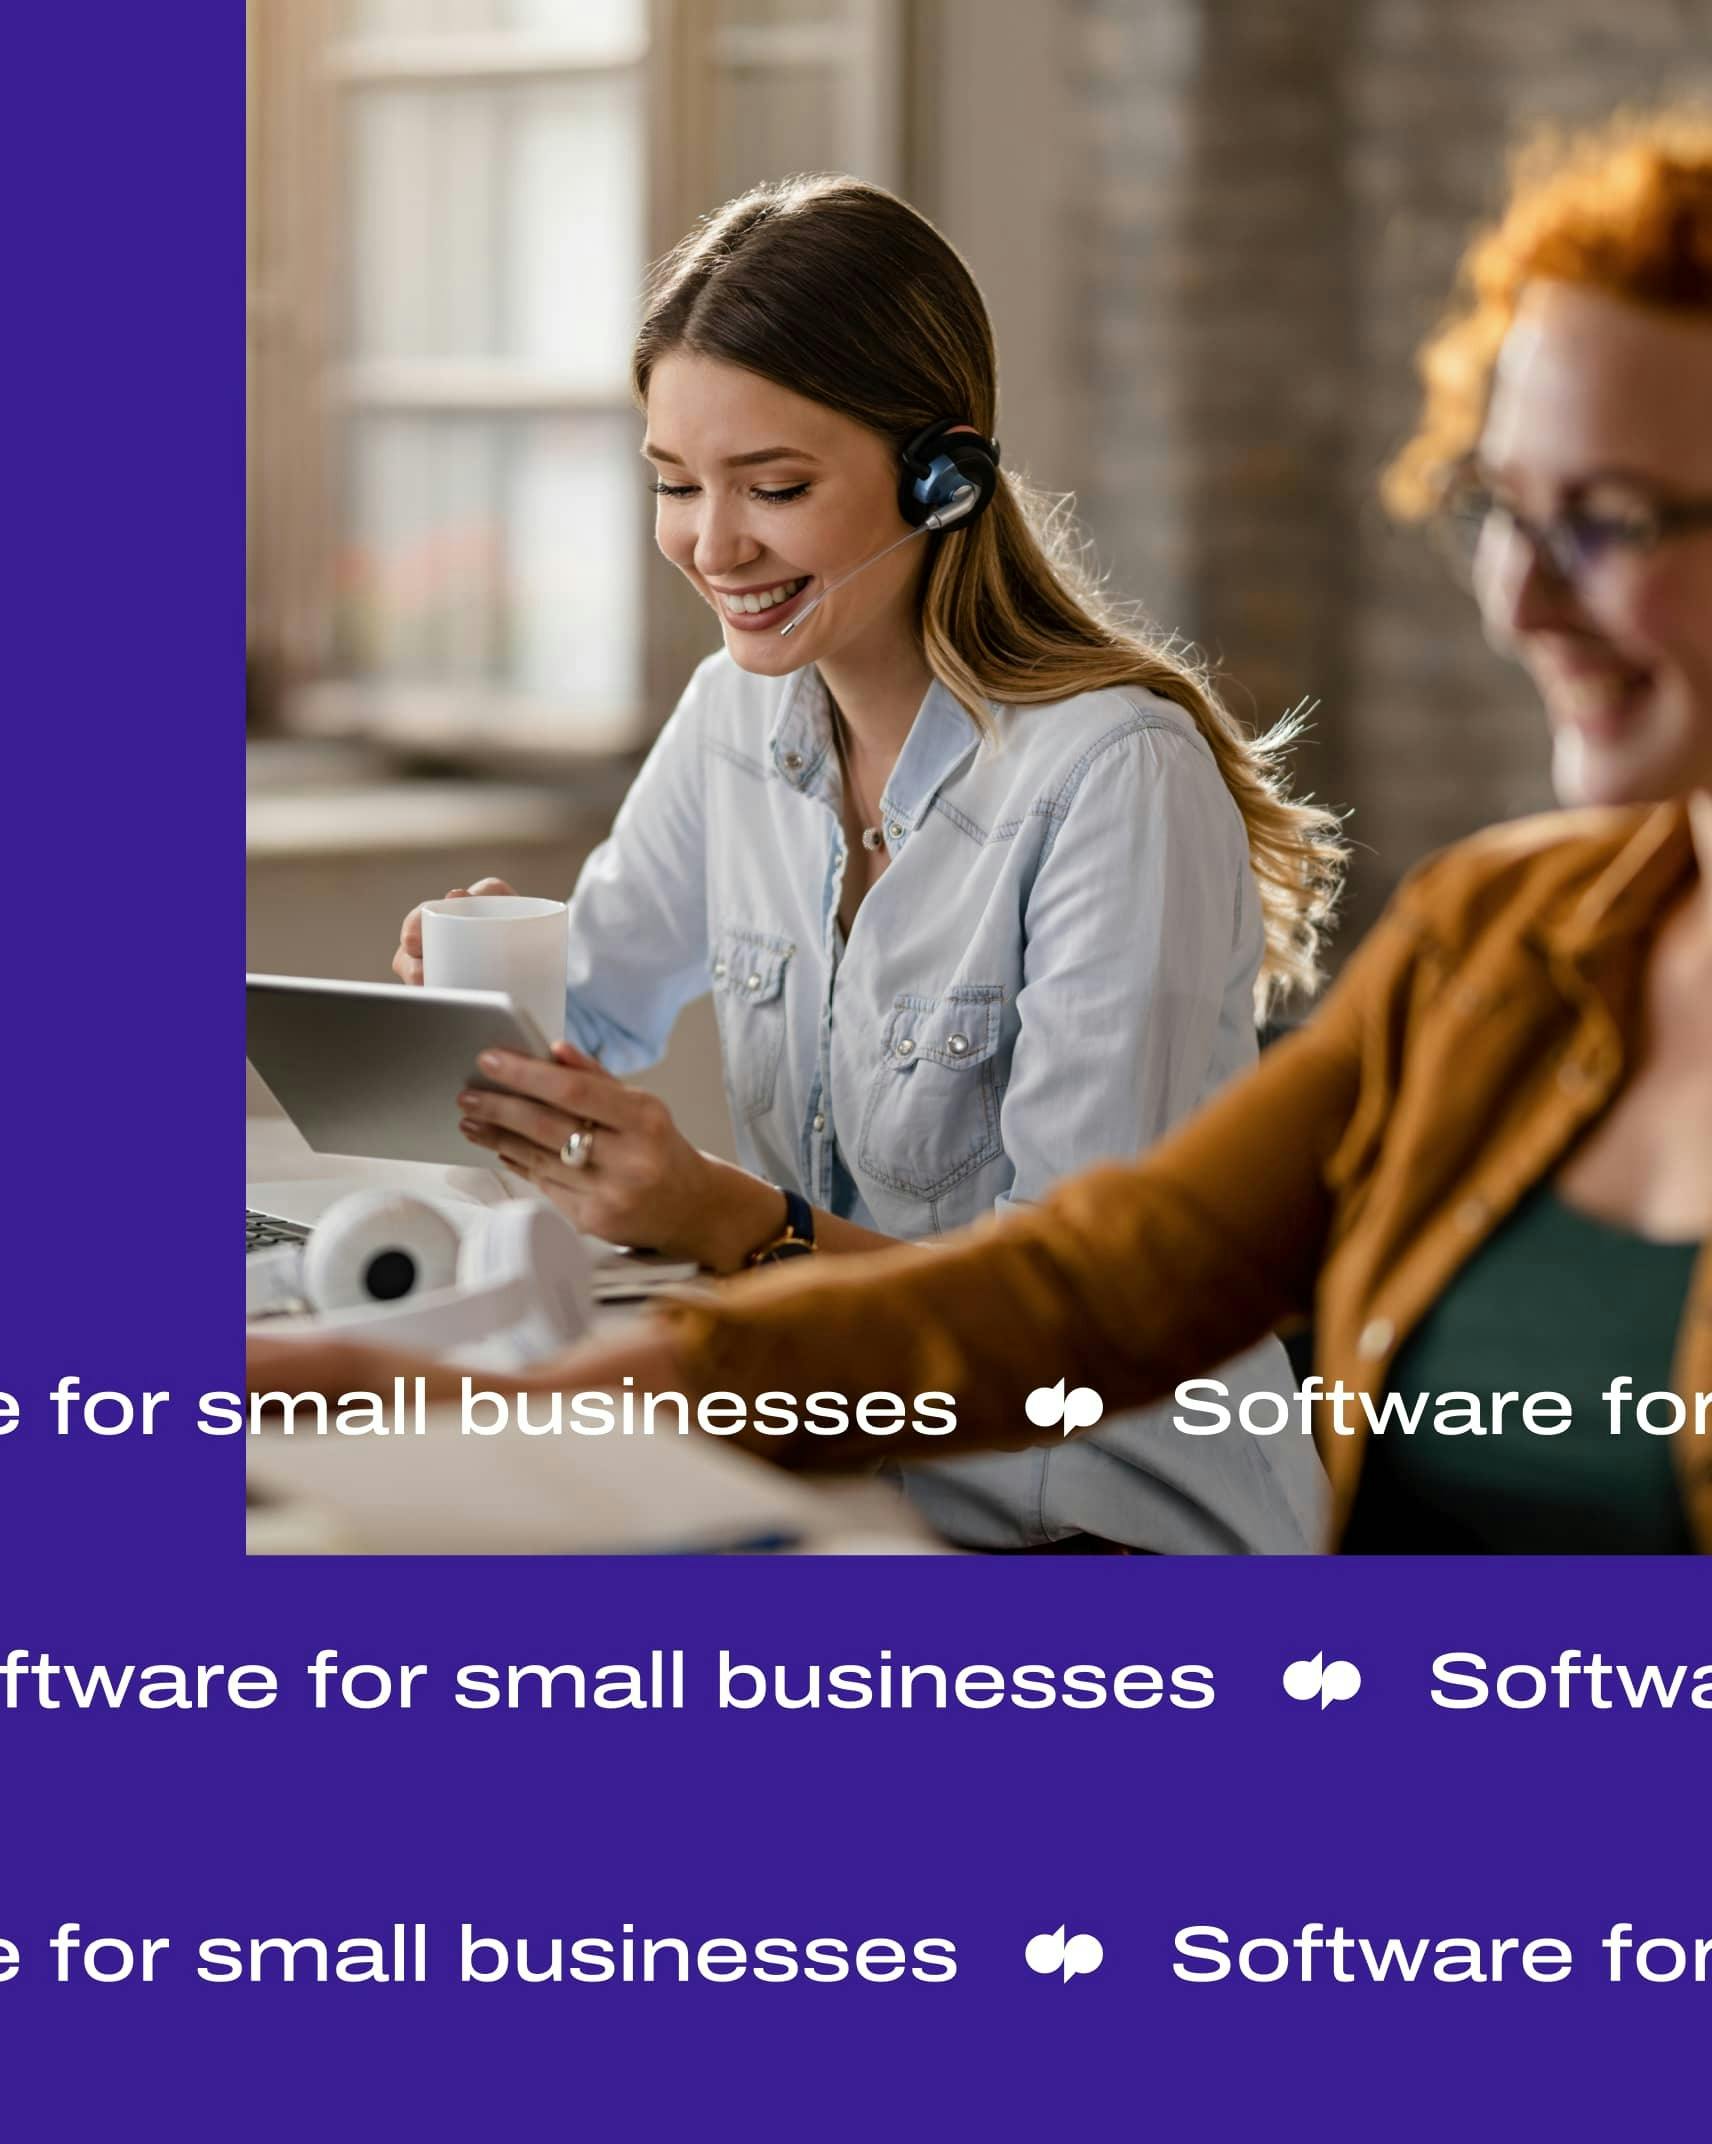 Software for small businesses